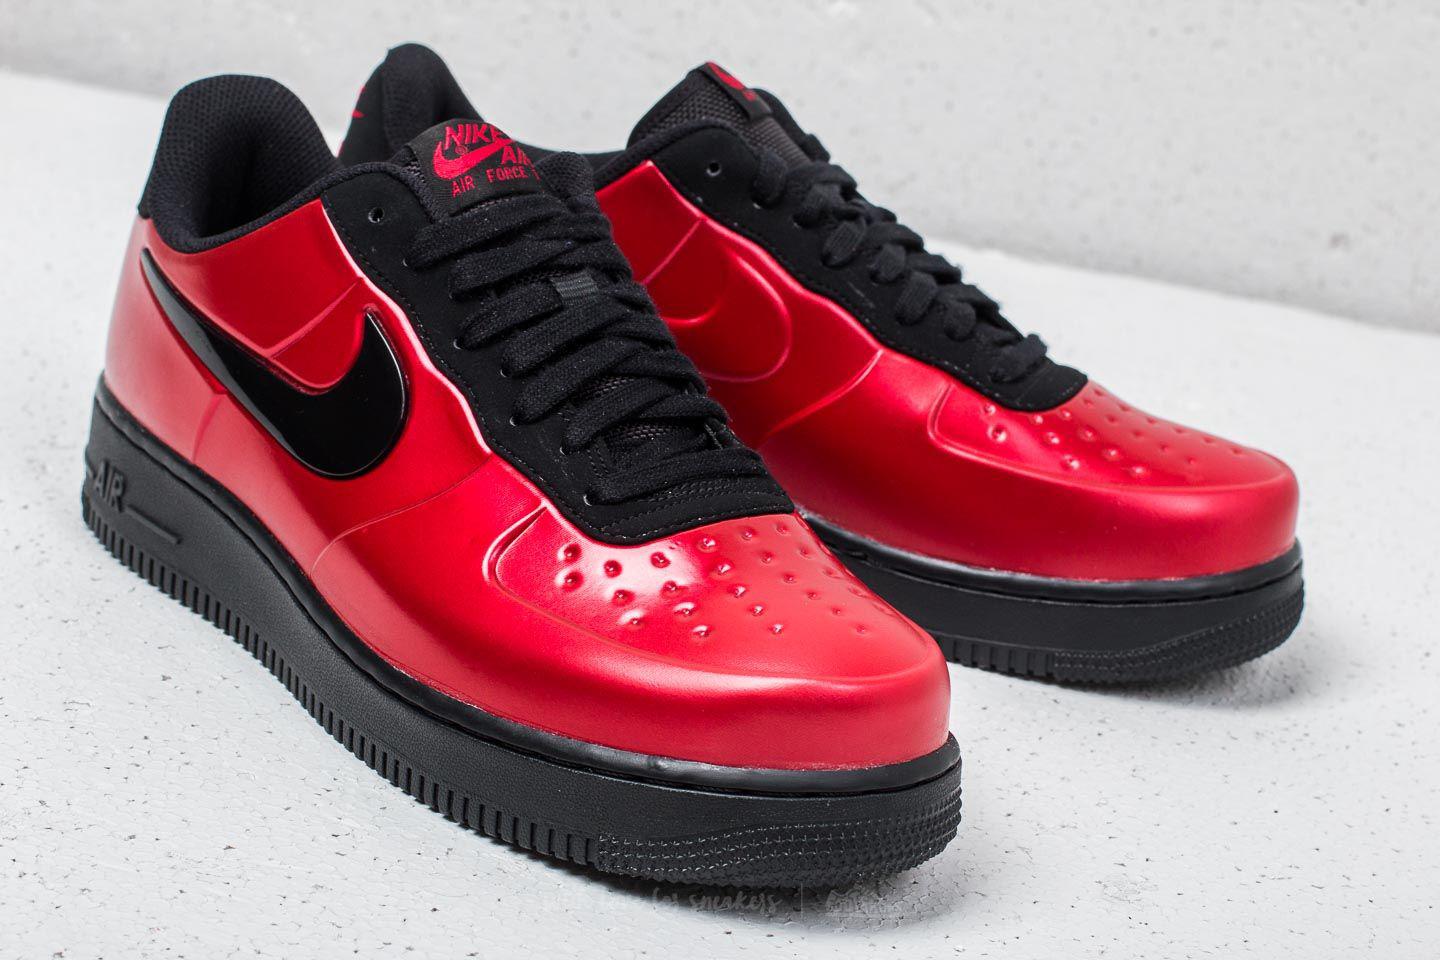 red nike air force 1 foamposite